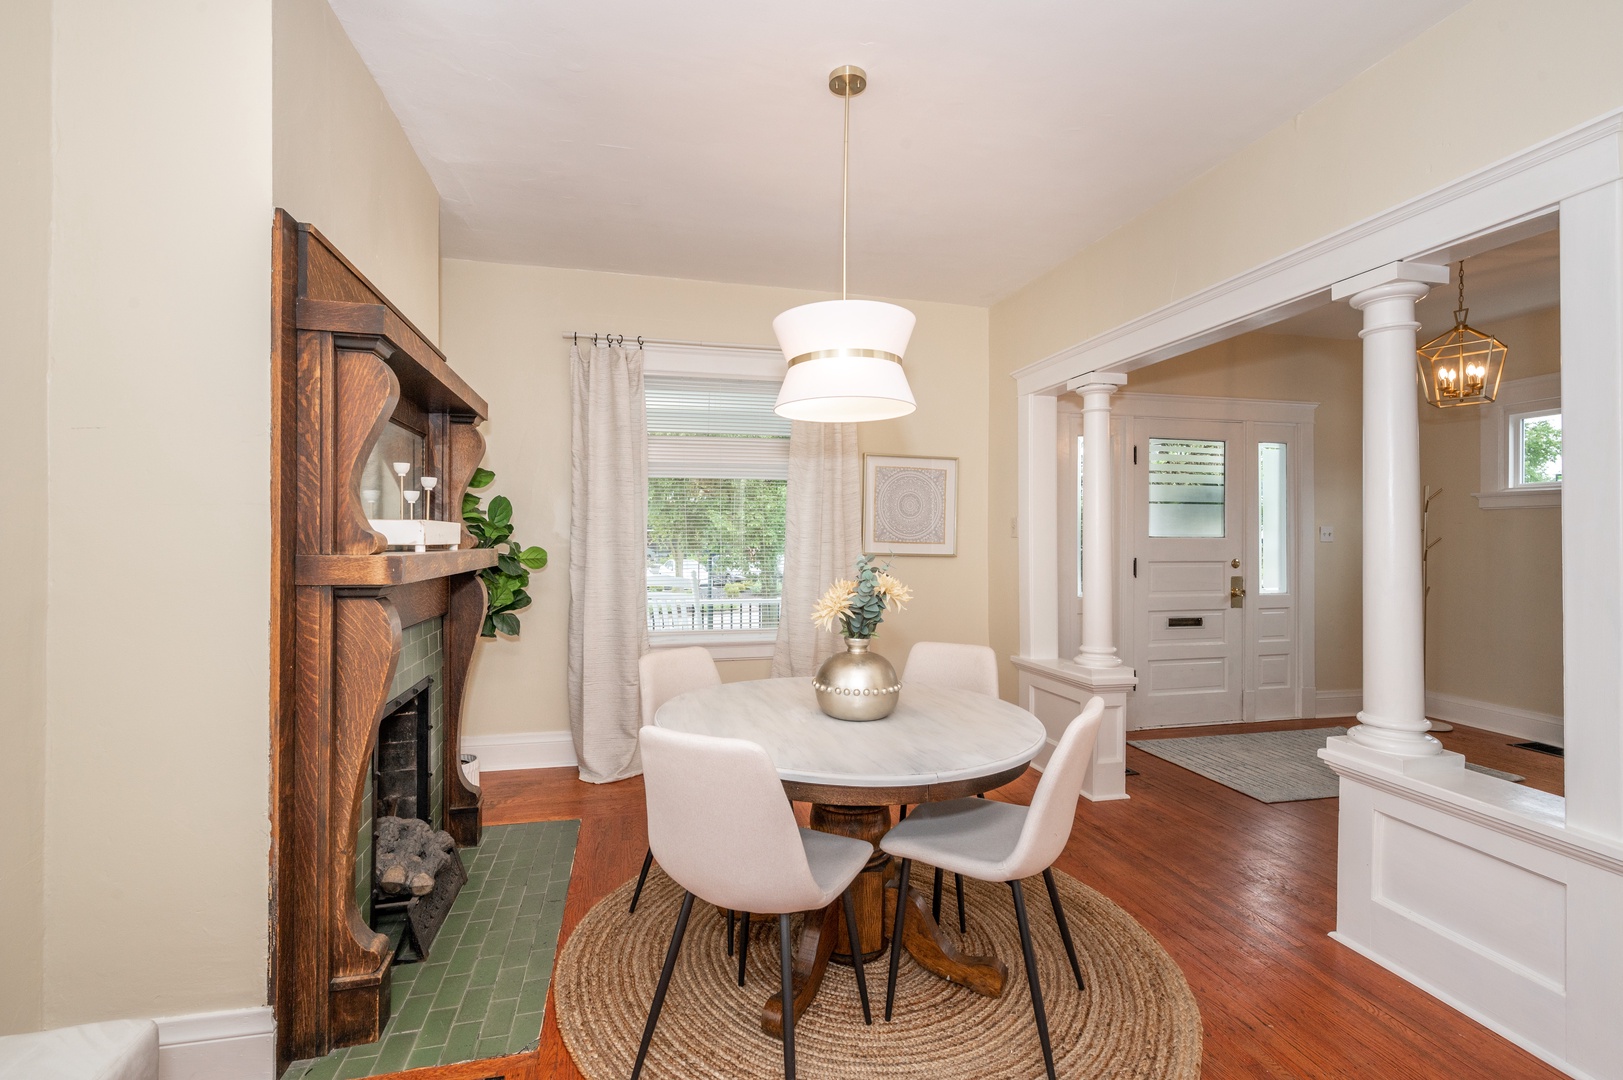 Off the entryway, find a charming dining area with table seating for 4